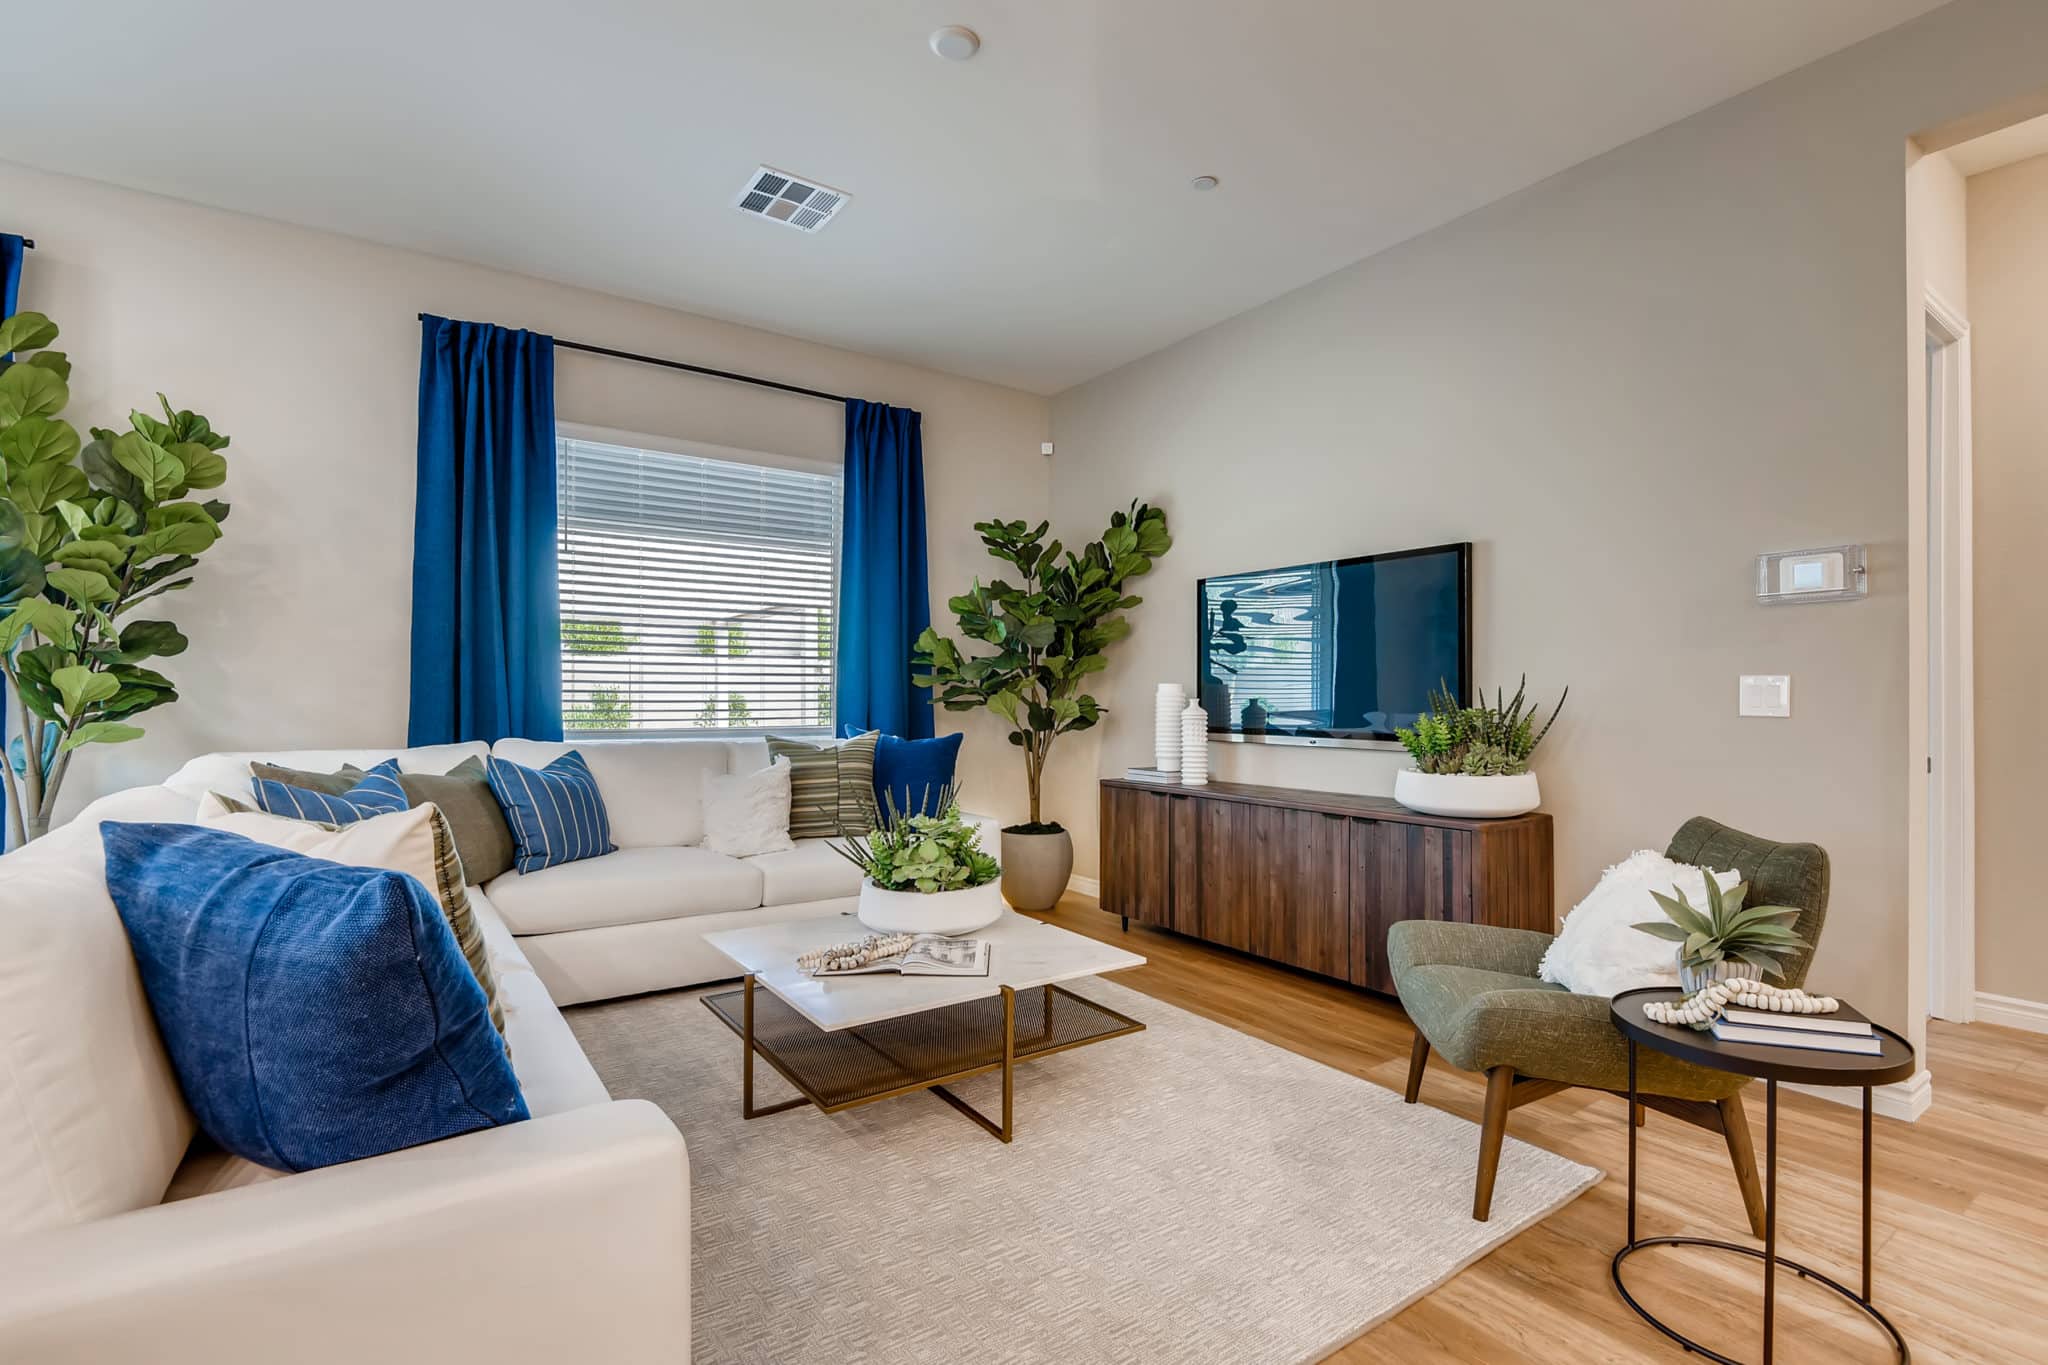 Living Room of Sidney model at Heritage by Lennar